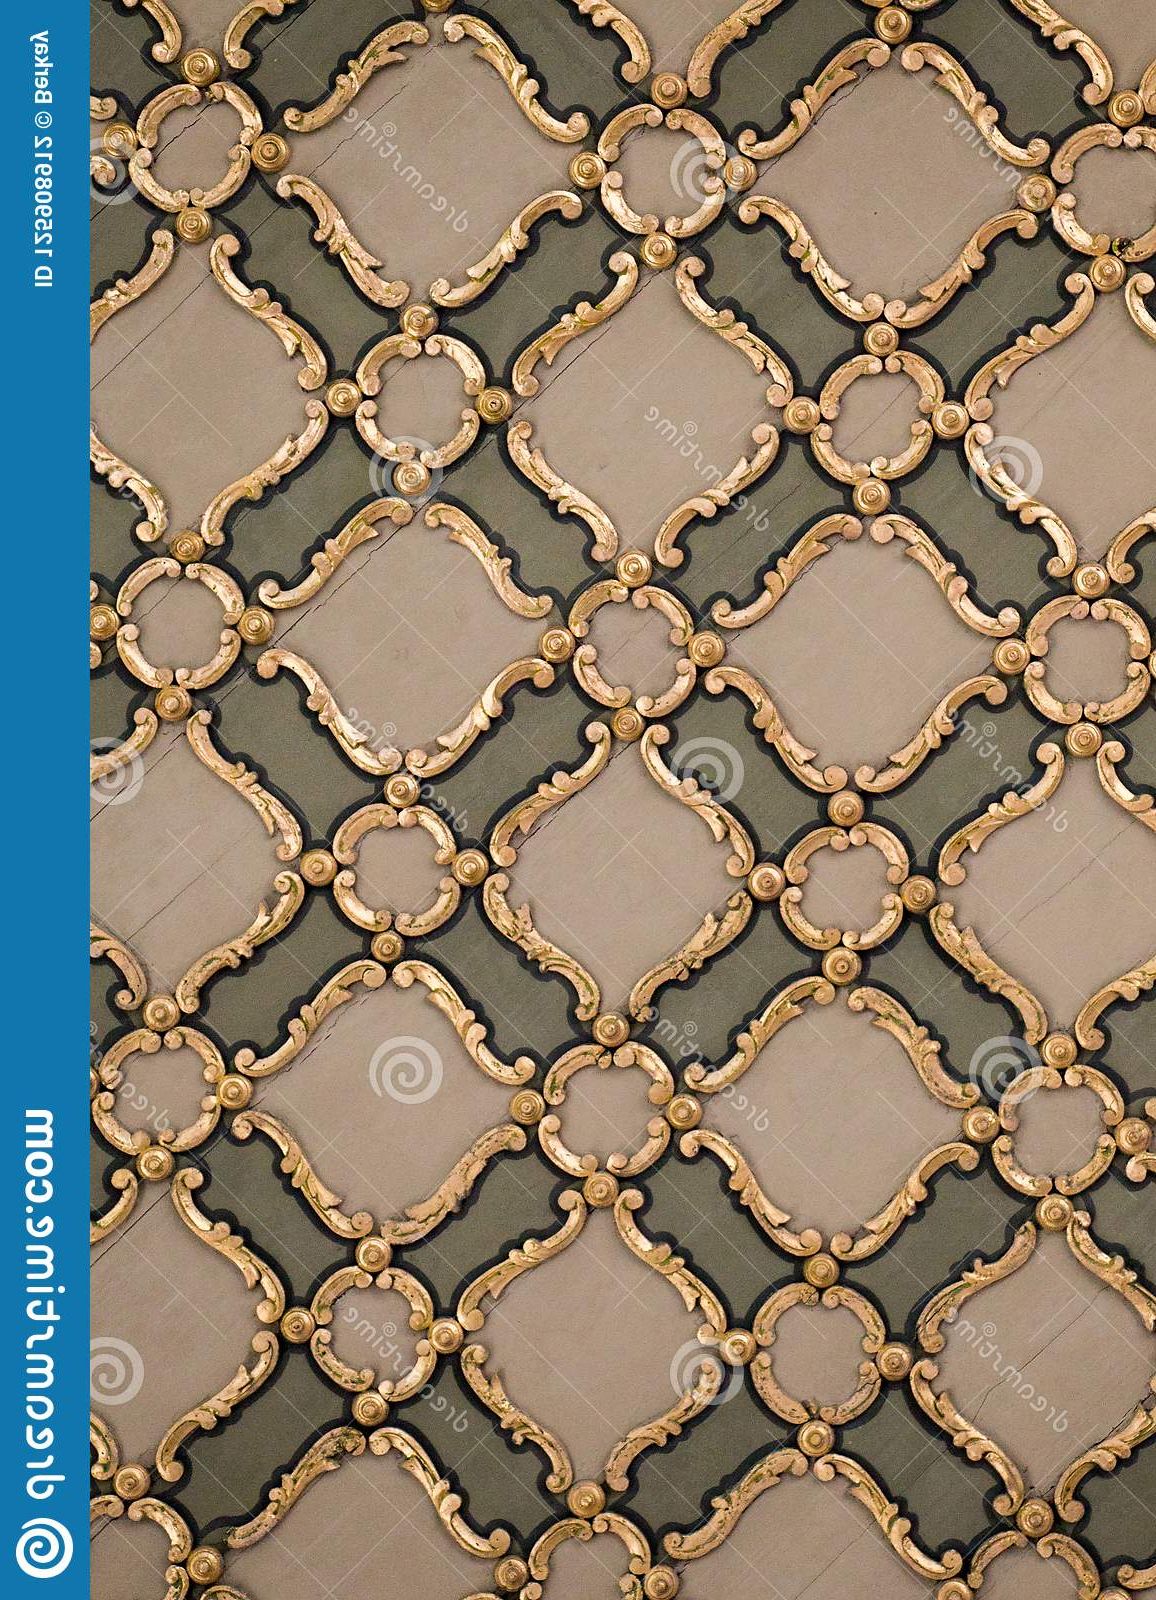 Brushed Geometric Pattern Ottomans Throughout Favorite Ottoman Turkish Art With Geometric Patterns Stock Photo – Image Of (View 10 of 10)